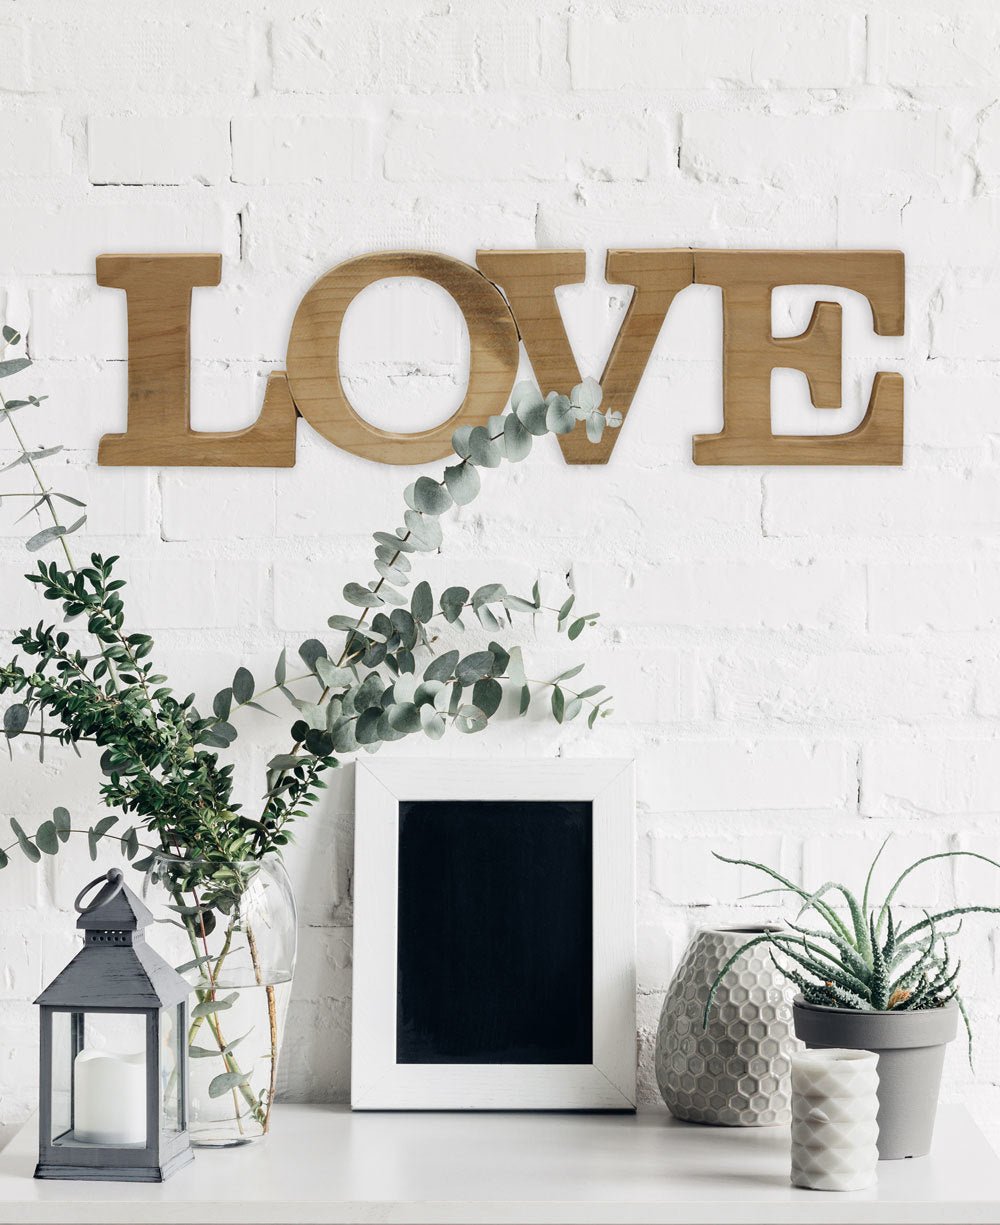 Self-Standing Shabby Chic Wooden “Love” Sign - Posters, Prints, & Visual Artwork